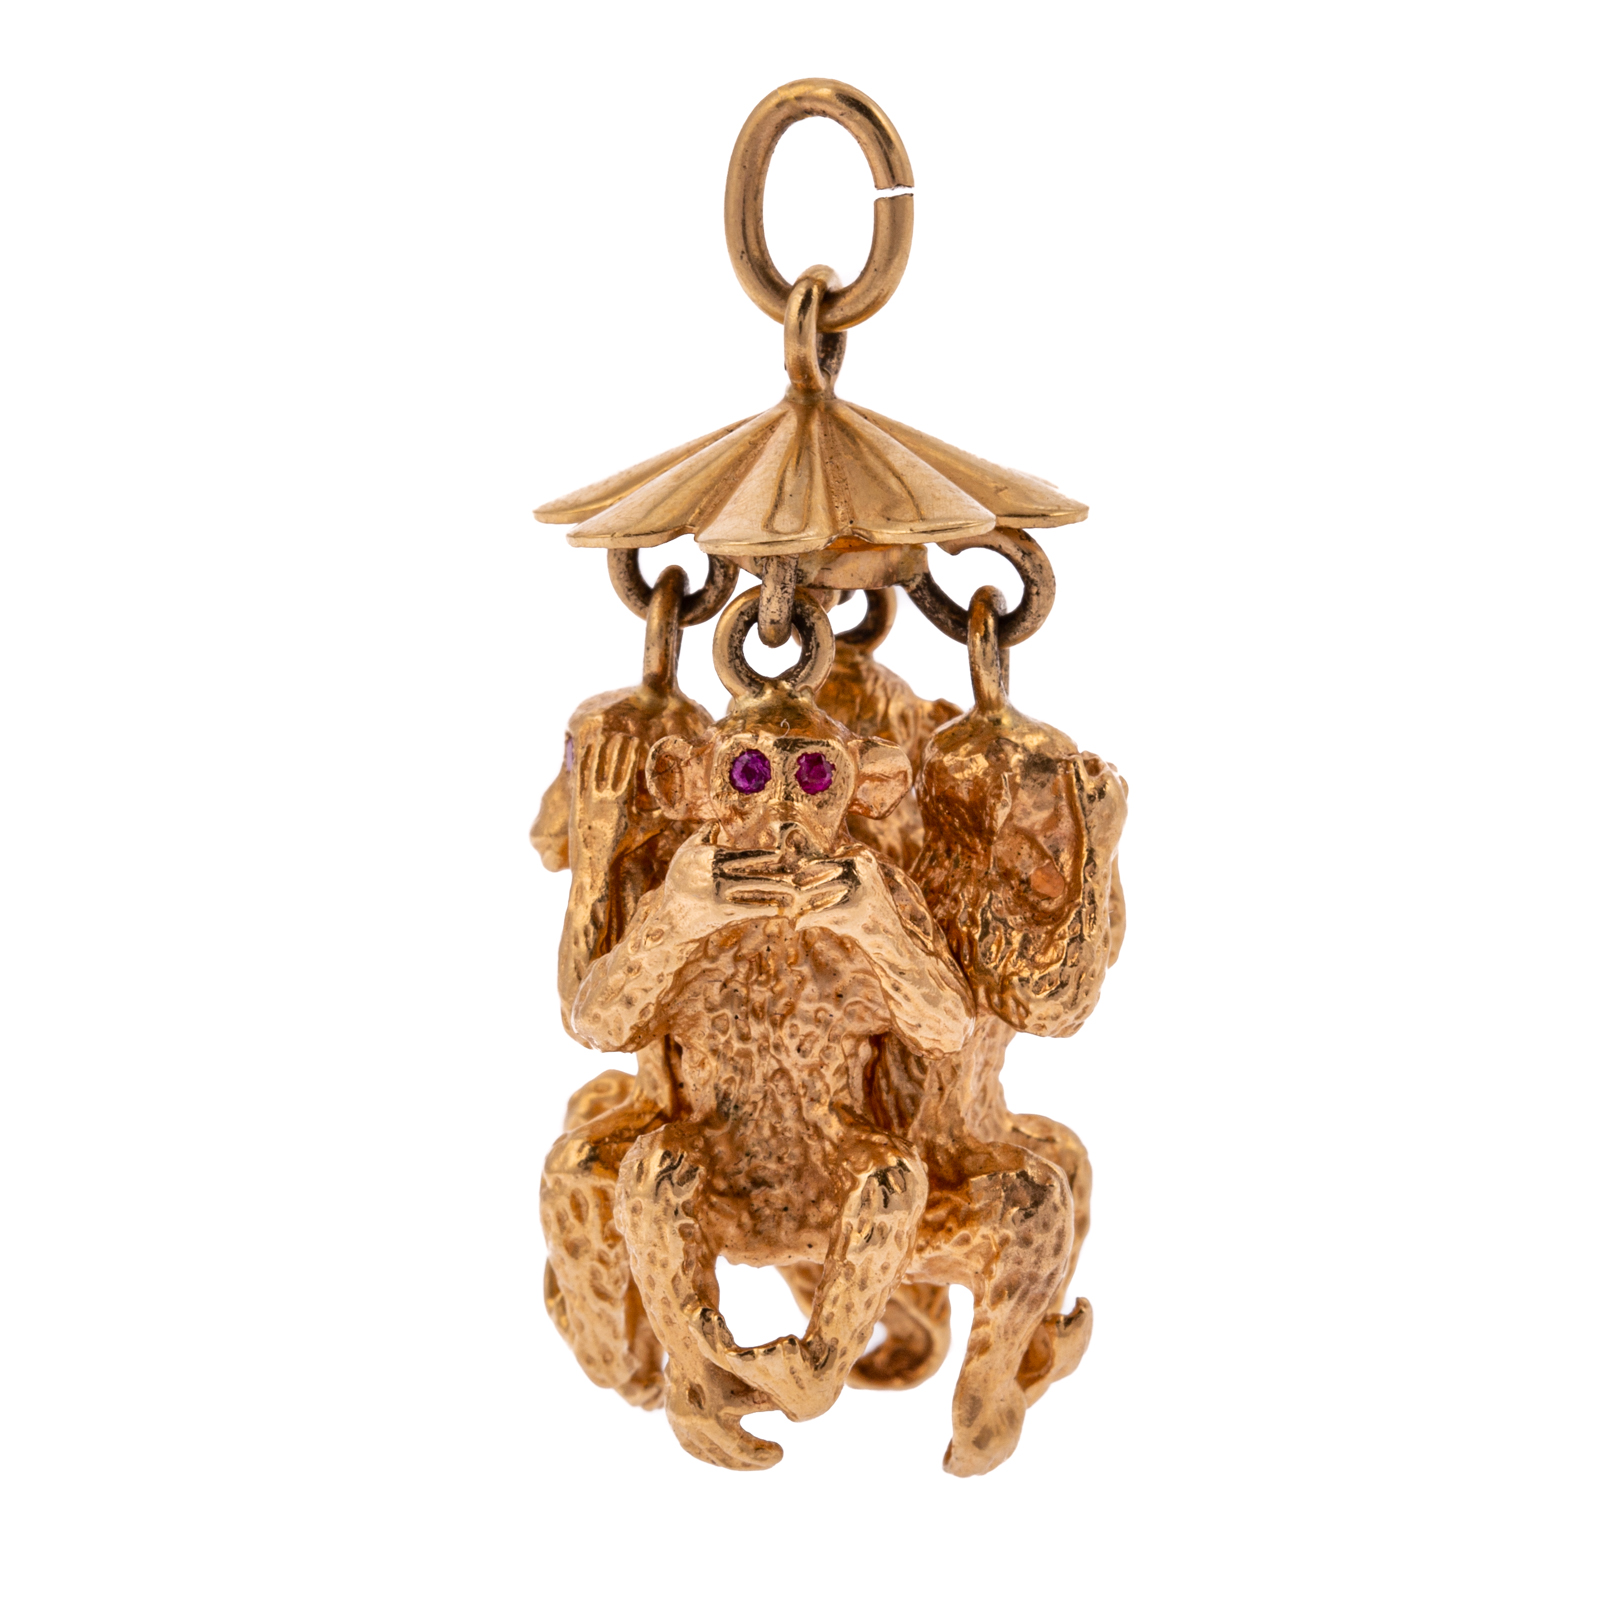 A WHIMSICAL WISE MONKEY CHARM IN 288d0c